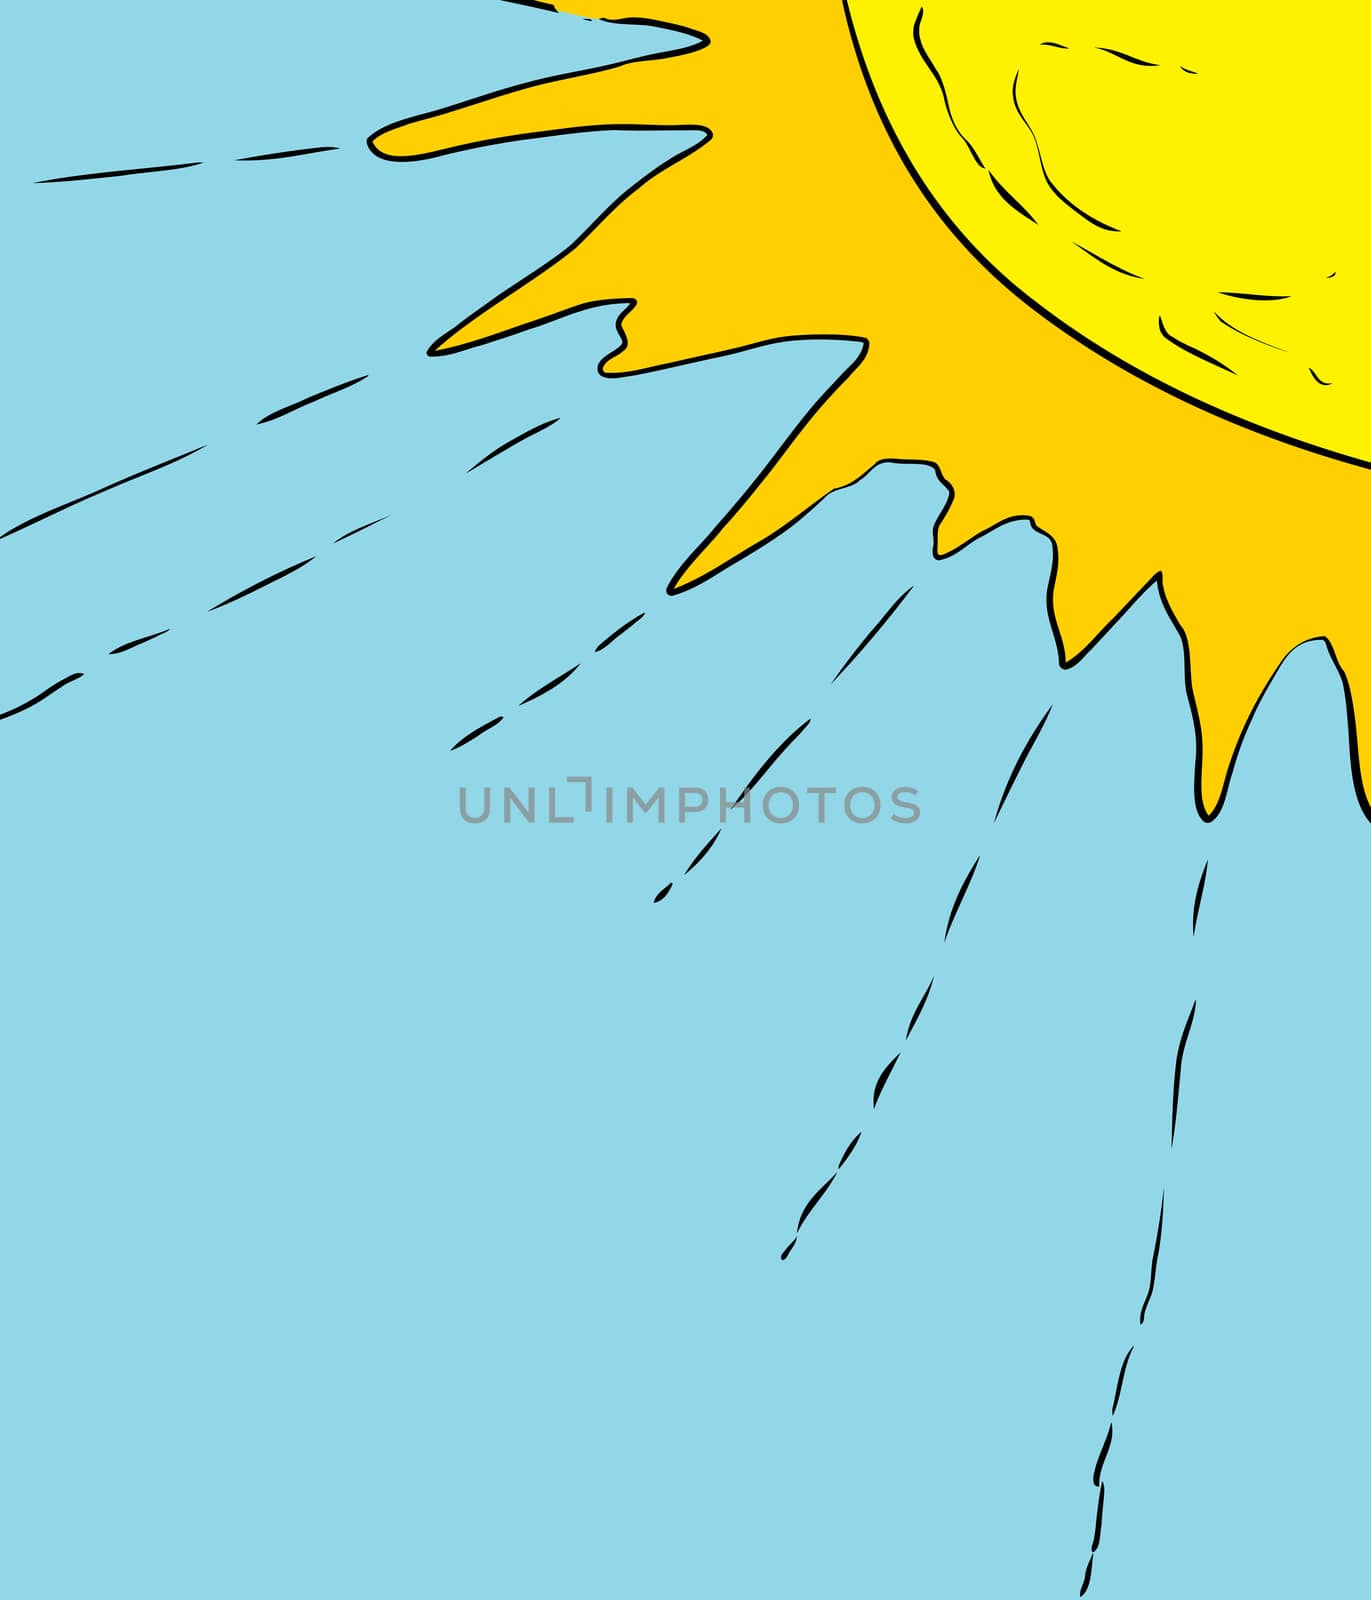 Background illustration of scribbled sun with rays coming from it